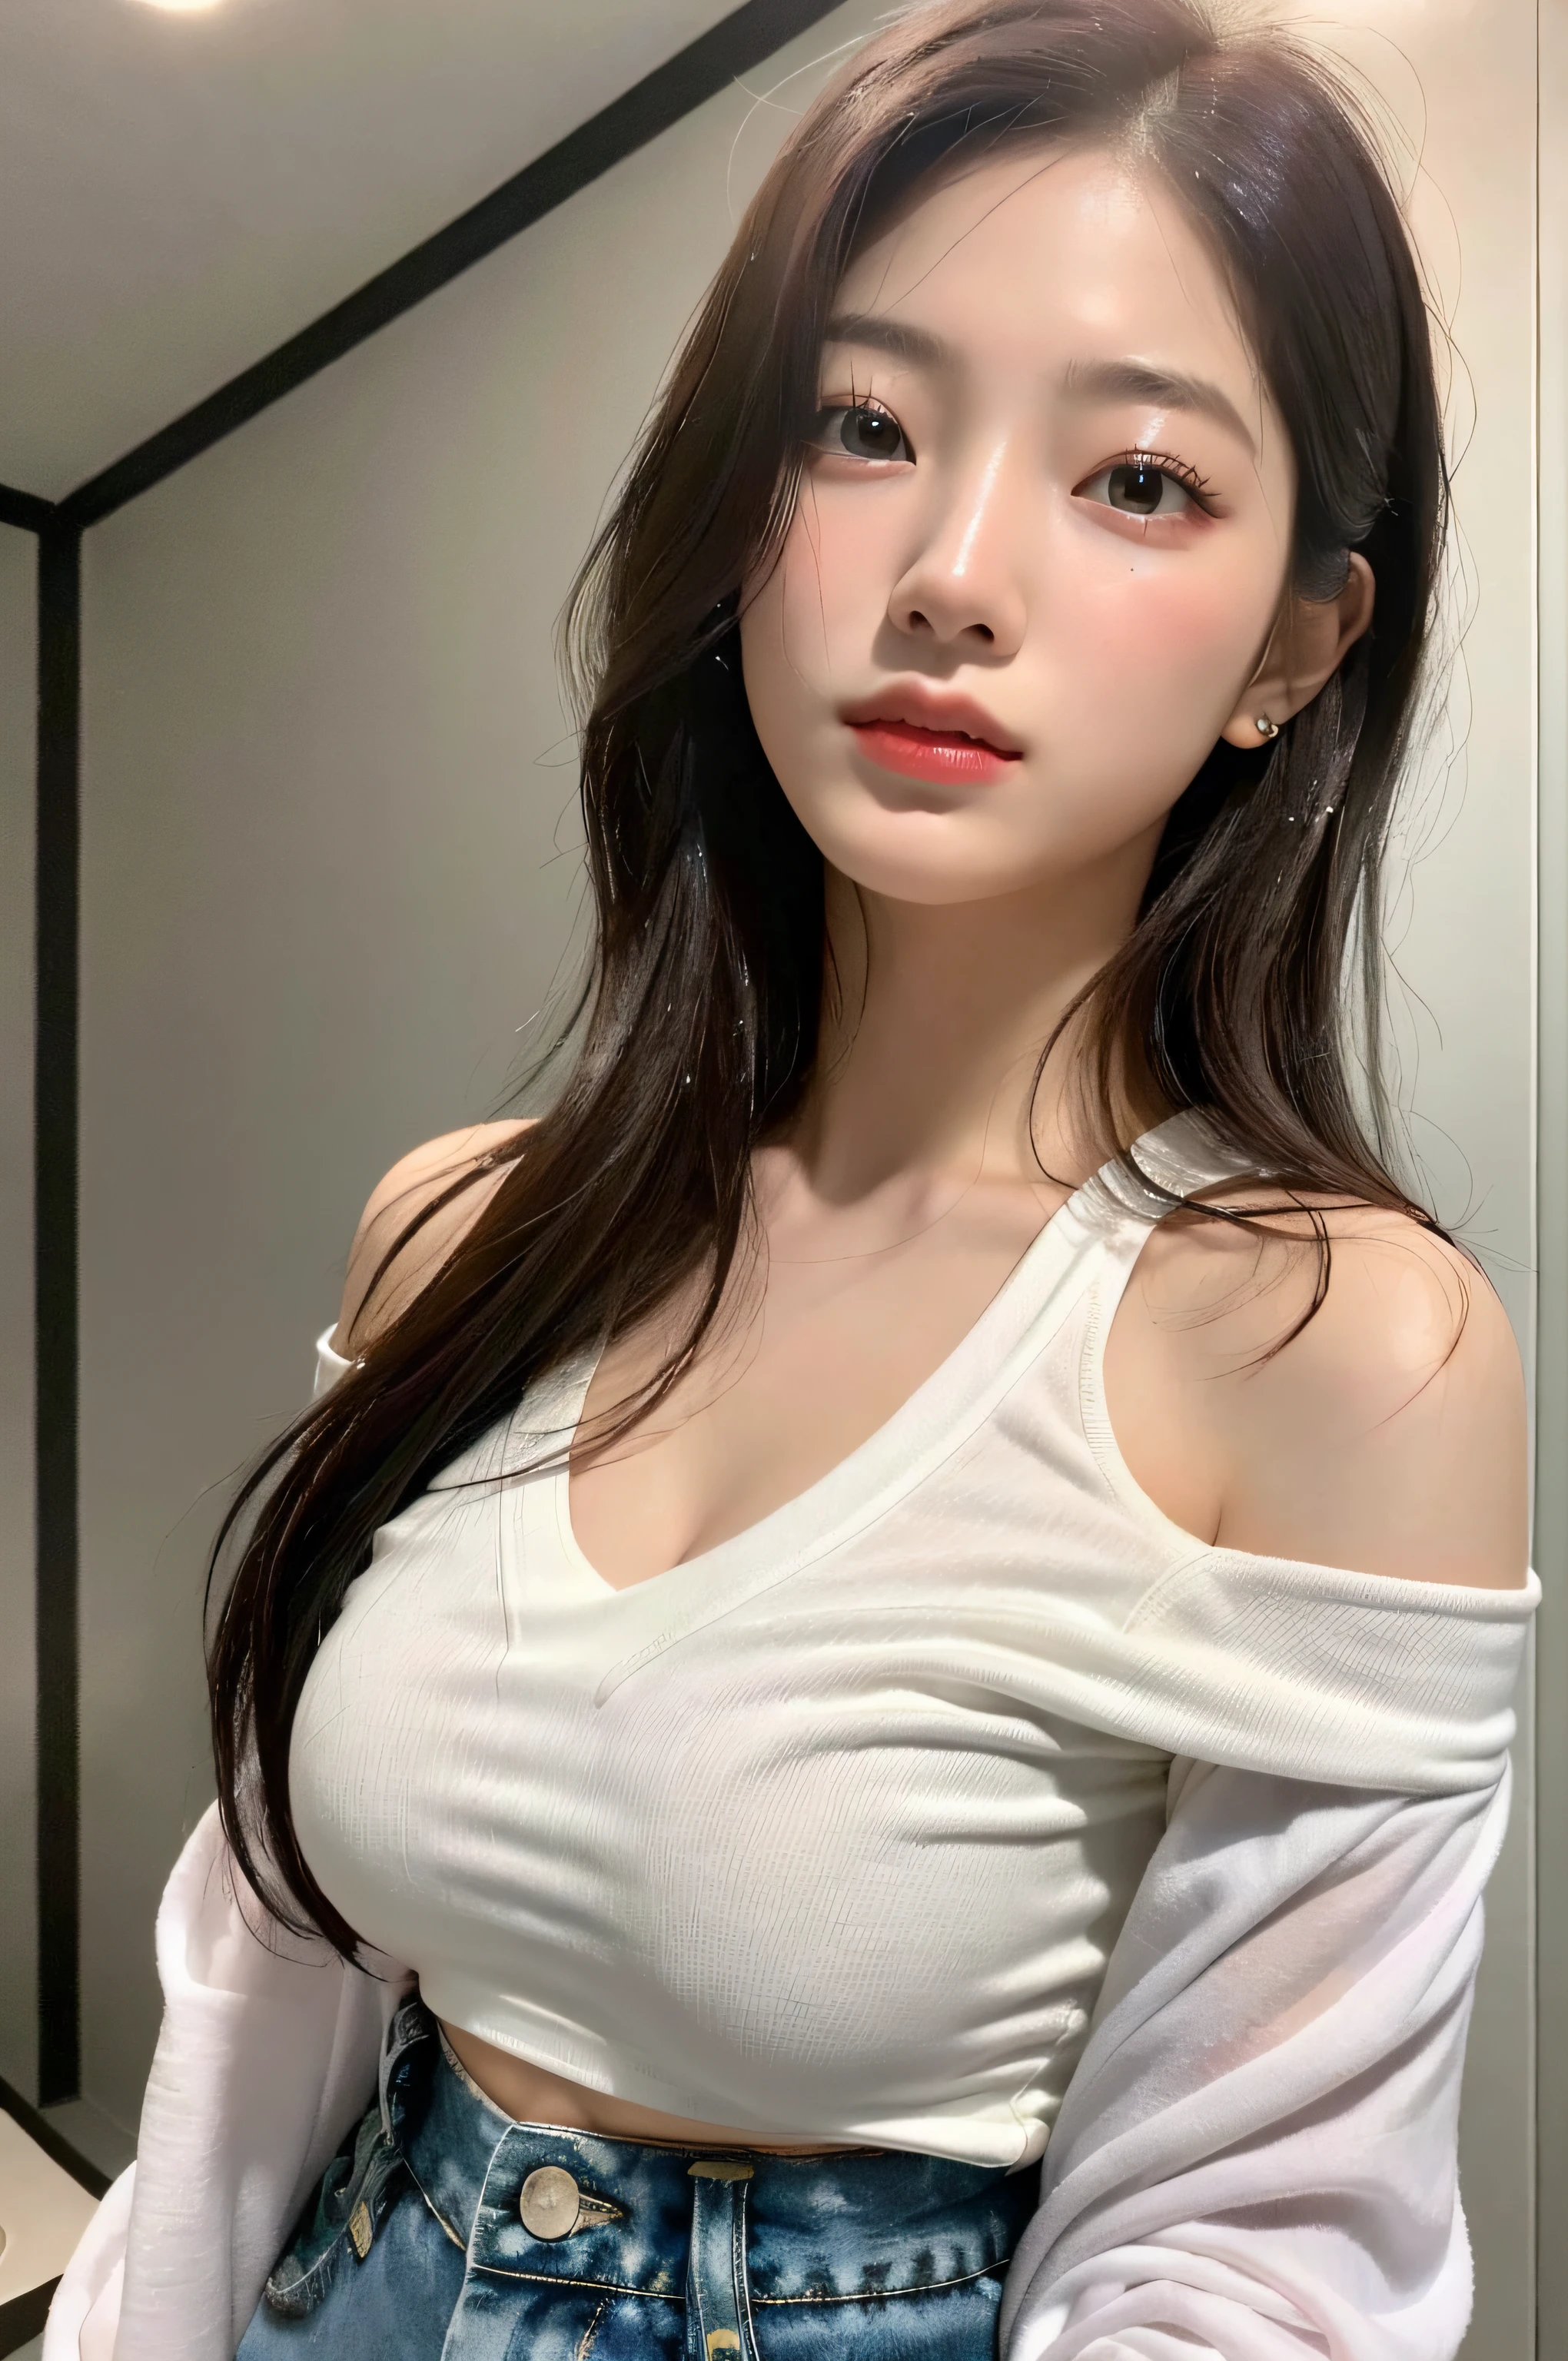 1girl, (Super:1.2), ((White shirt:1.2)), RAW Photos, (Photorealistic:1.37, Realistic), High Definition CG Unified 8K Wallpaper, Watch Viewer, ((Straight from Front))), (HQ Skin: 1.8, Glossy Skin), 8K UHD, DSLR, Soft Lighting, High Quality, Film Grain, FUJIFILM XT3, ((Upper Body: 1.6) ), (Pro Lighting: 1.6), (shower, wet body, wet clothes: 4.1), from below, emphasizing cleavage, off-shoulder, braless